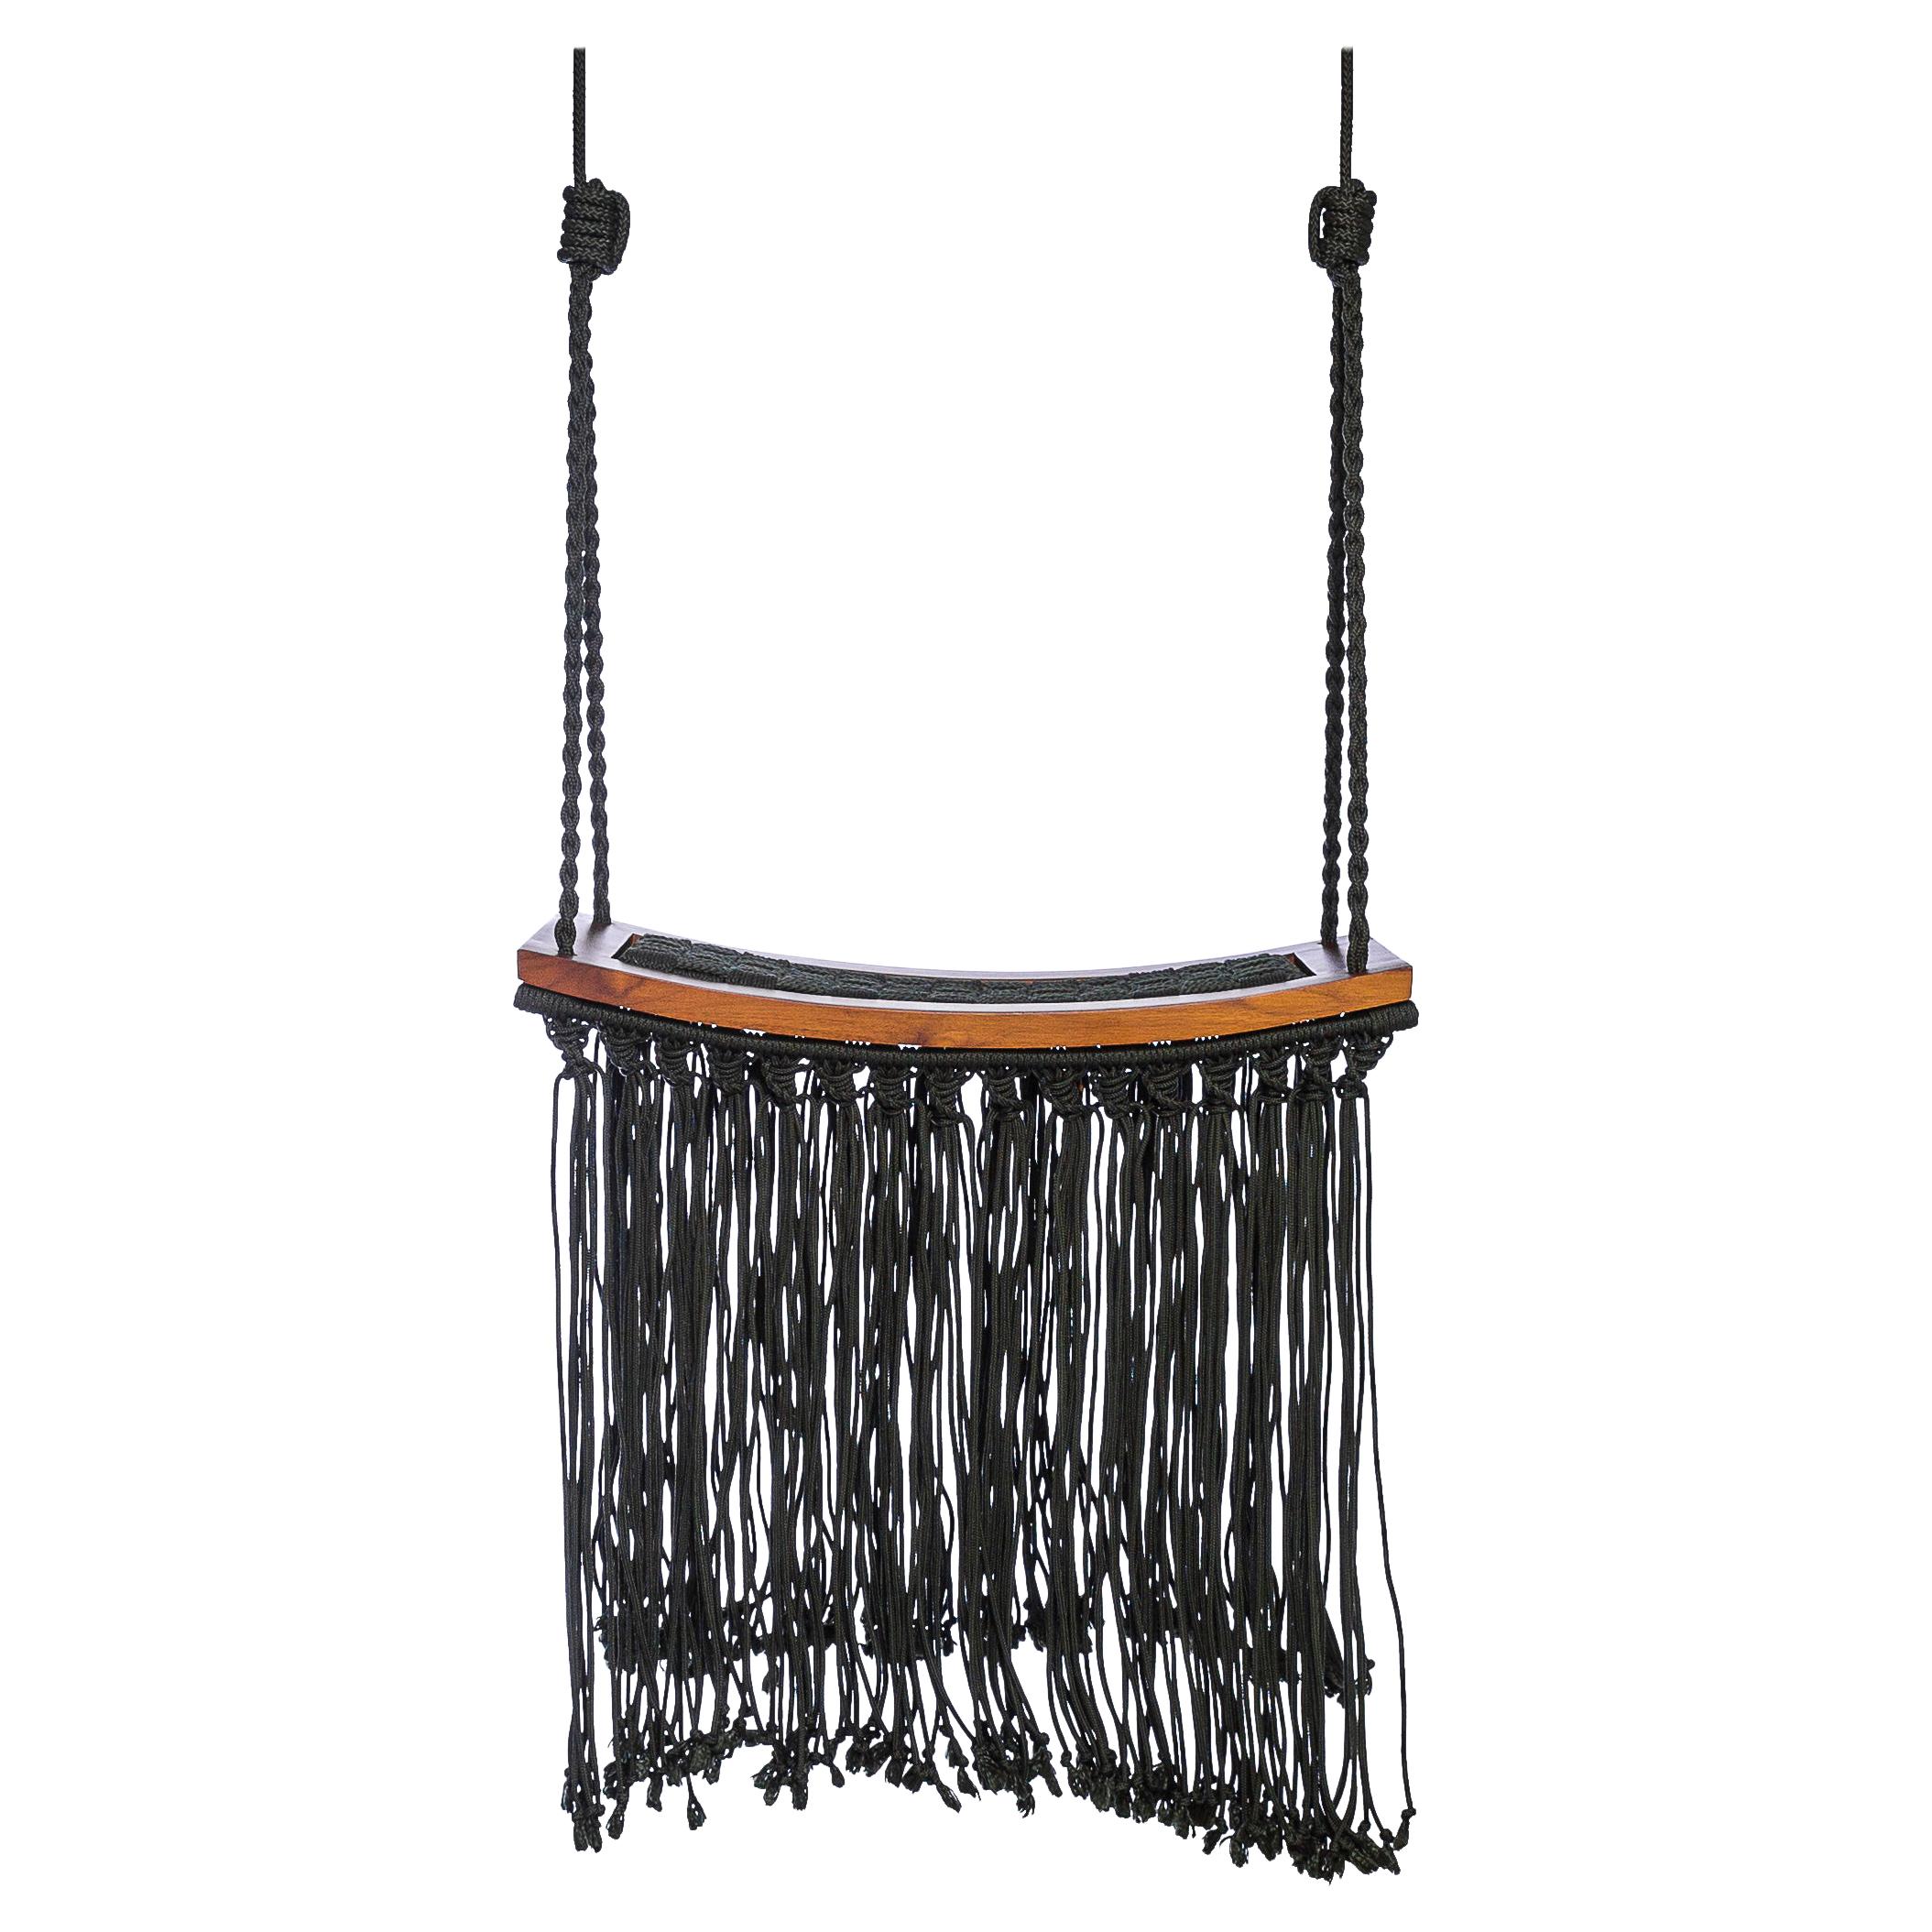 "Revoar" Hanging Swing Chair Outdoor Teak Wood and Naval Rope Fringes